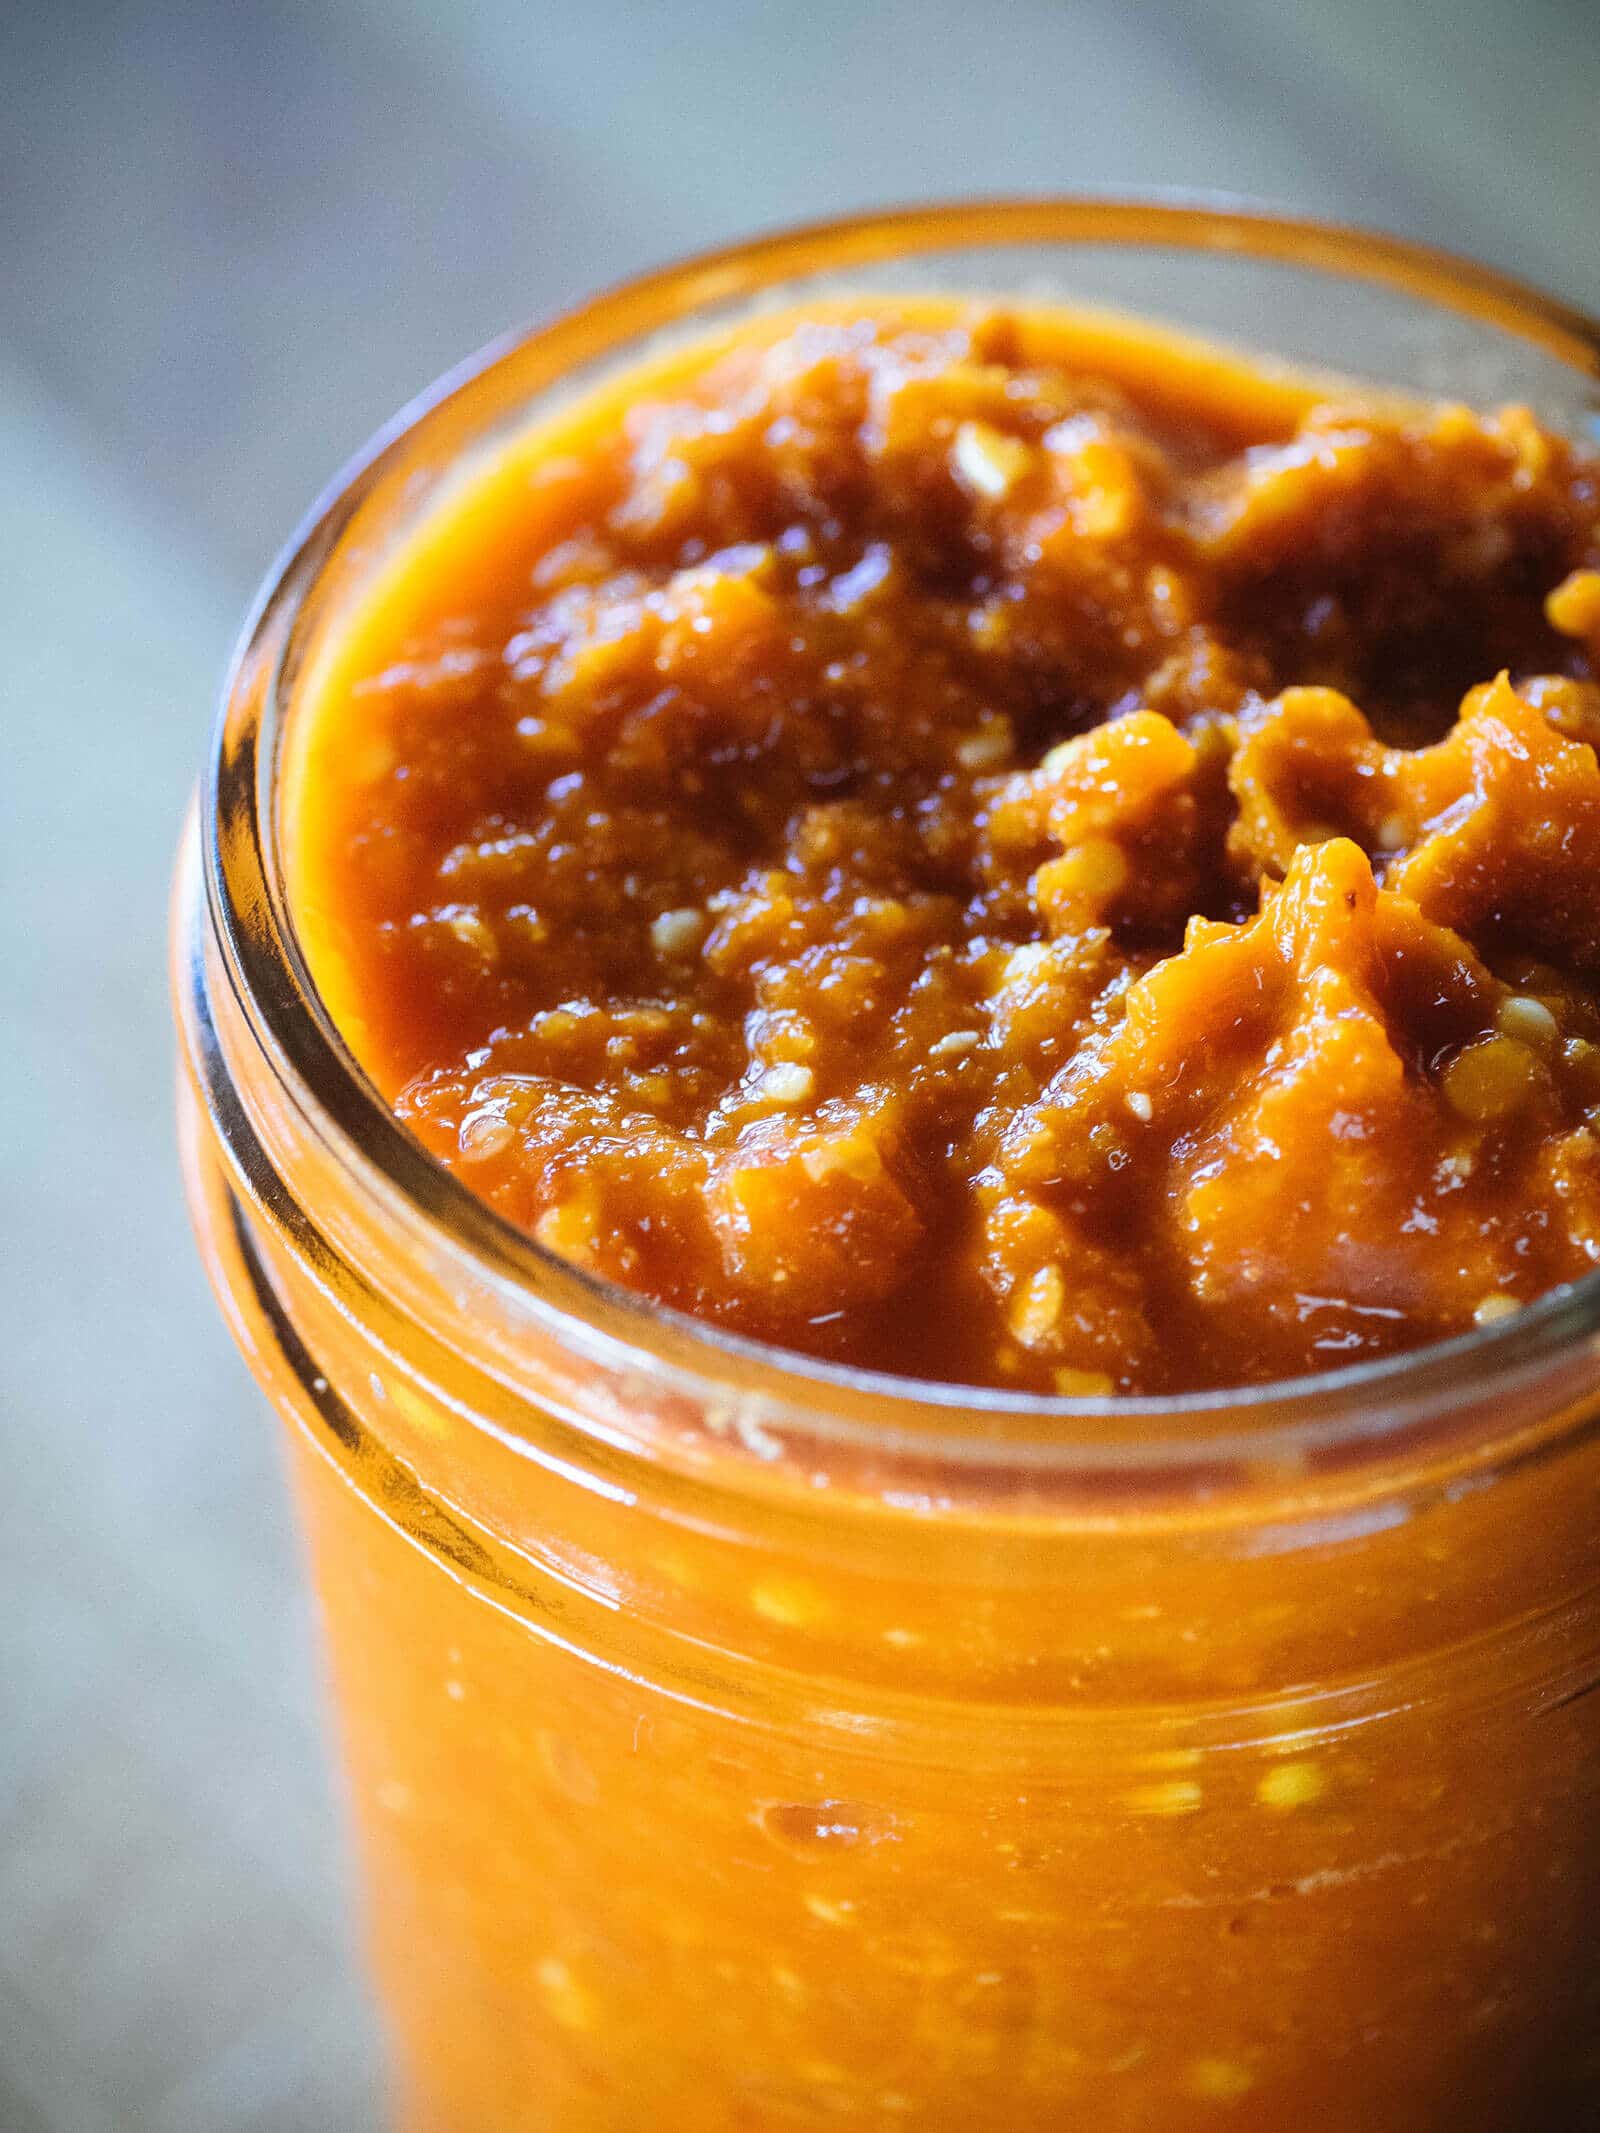 Chunky fermented hot sauce in a jar